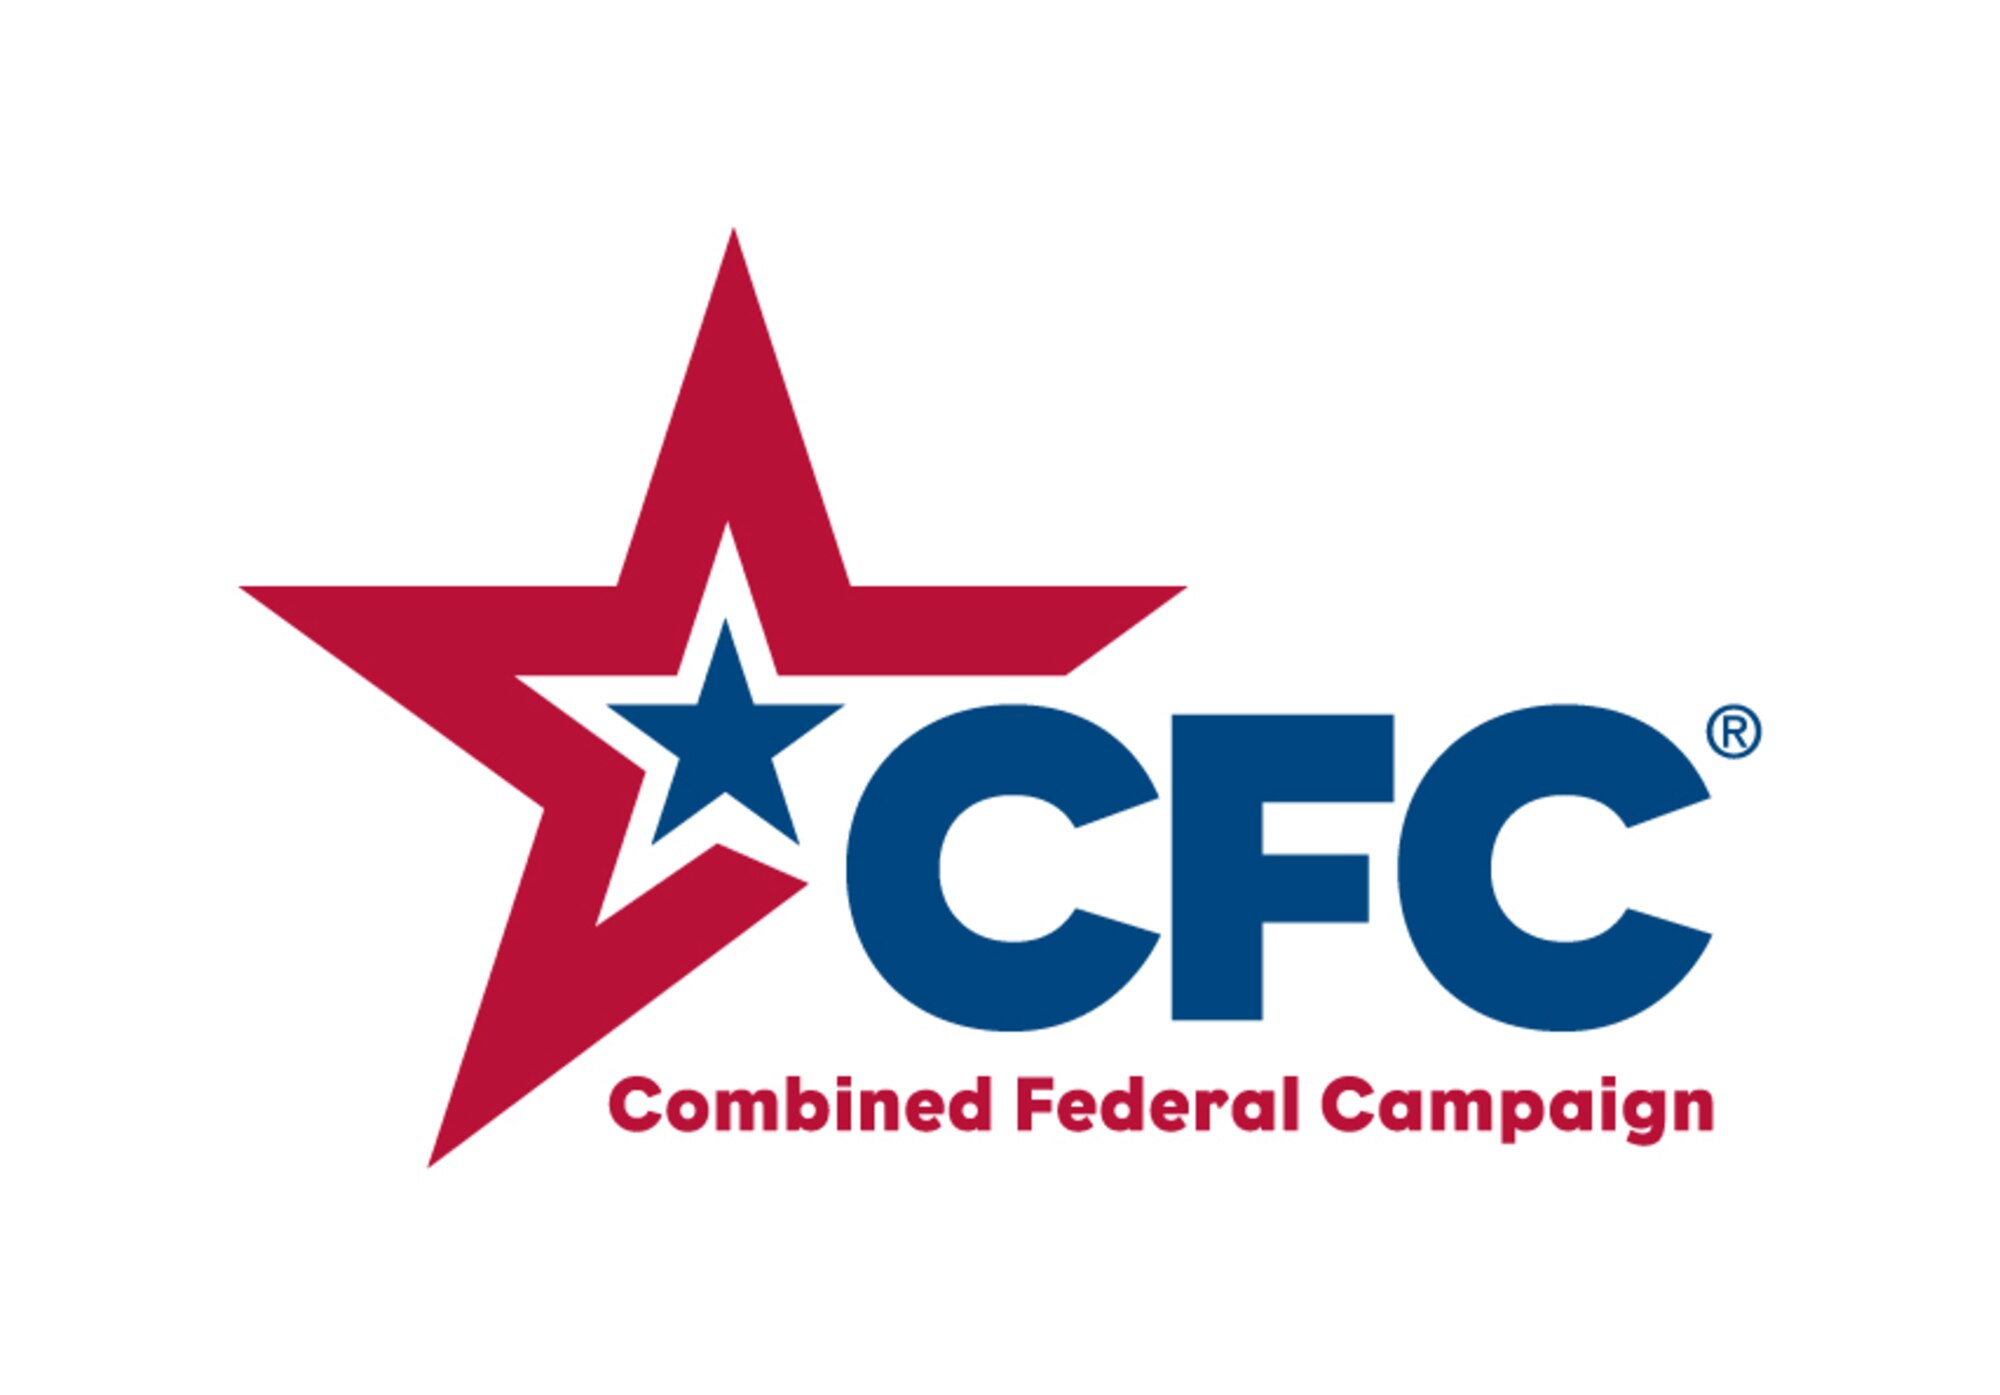 The Combined Federal Campaign (CFC) officially kicked off at MacDill Air Force Base, Fla., Sept. 21, 2016, with the theme “Show Some Love.” The CFC provides federal employees an opportunity to donate to a selection of more than 20,000 non-profit charities. (Courtesy Logo)